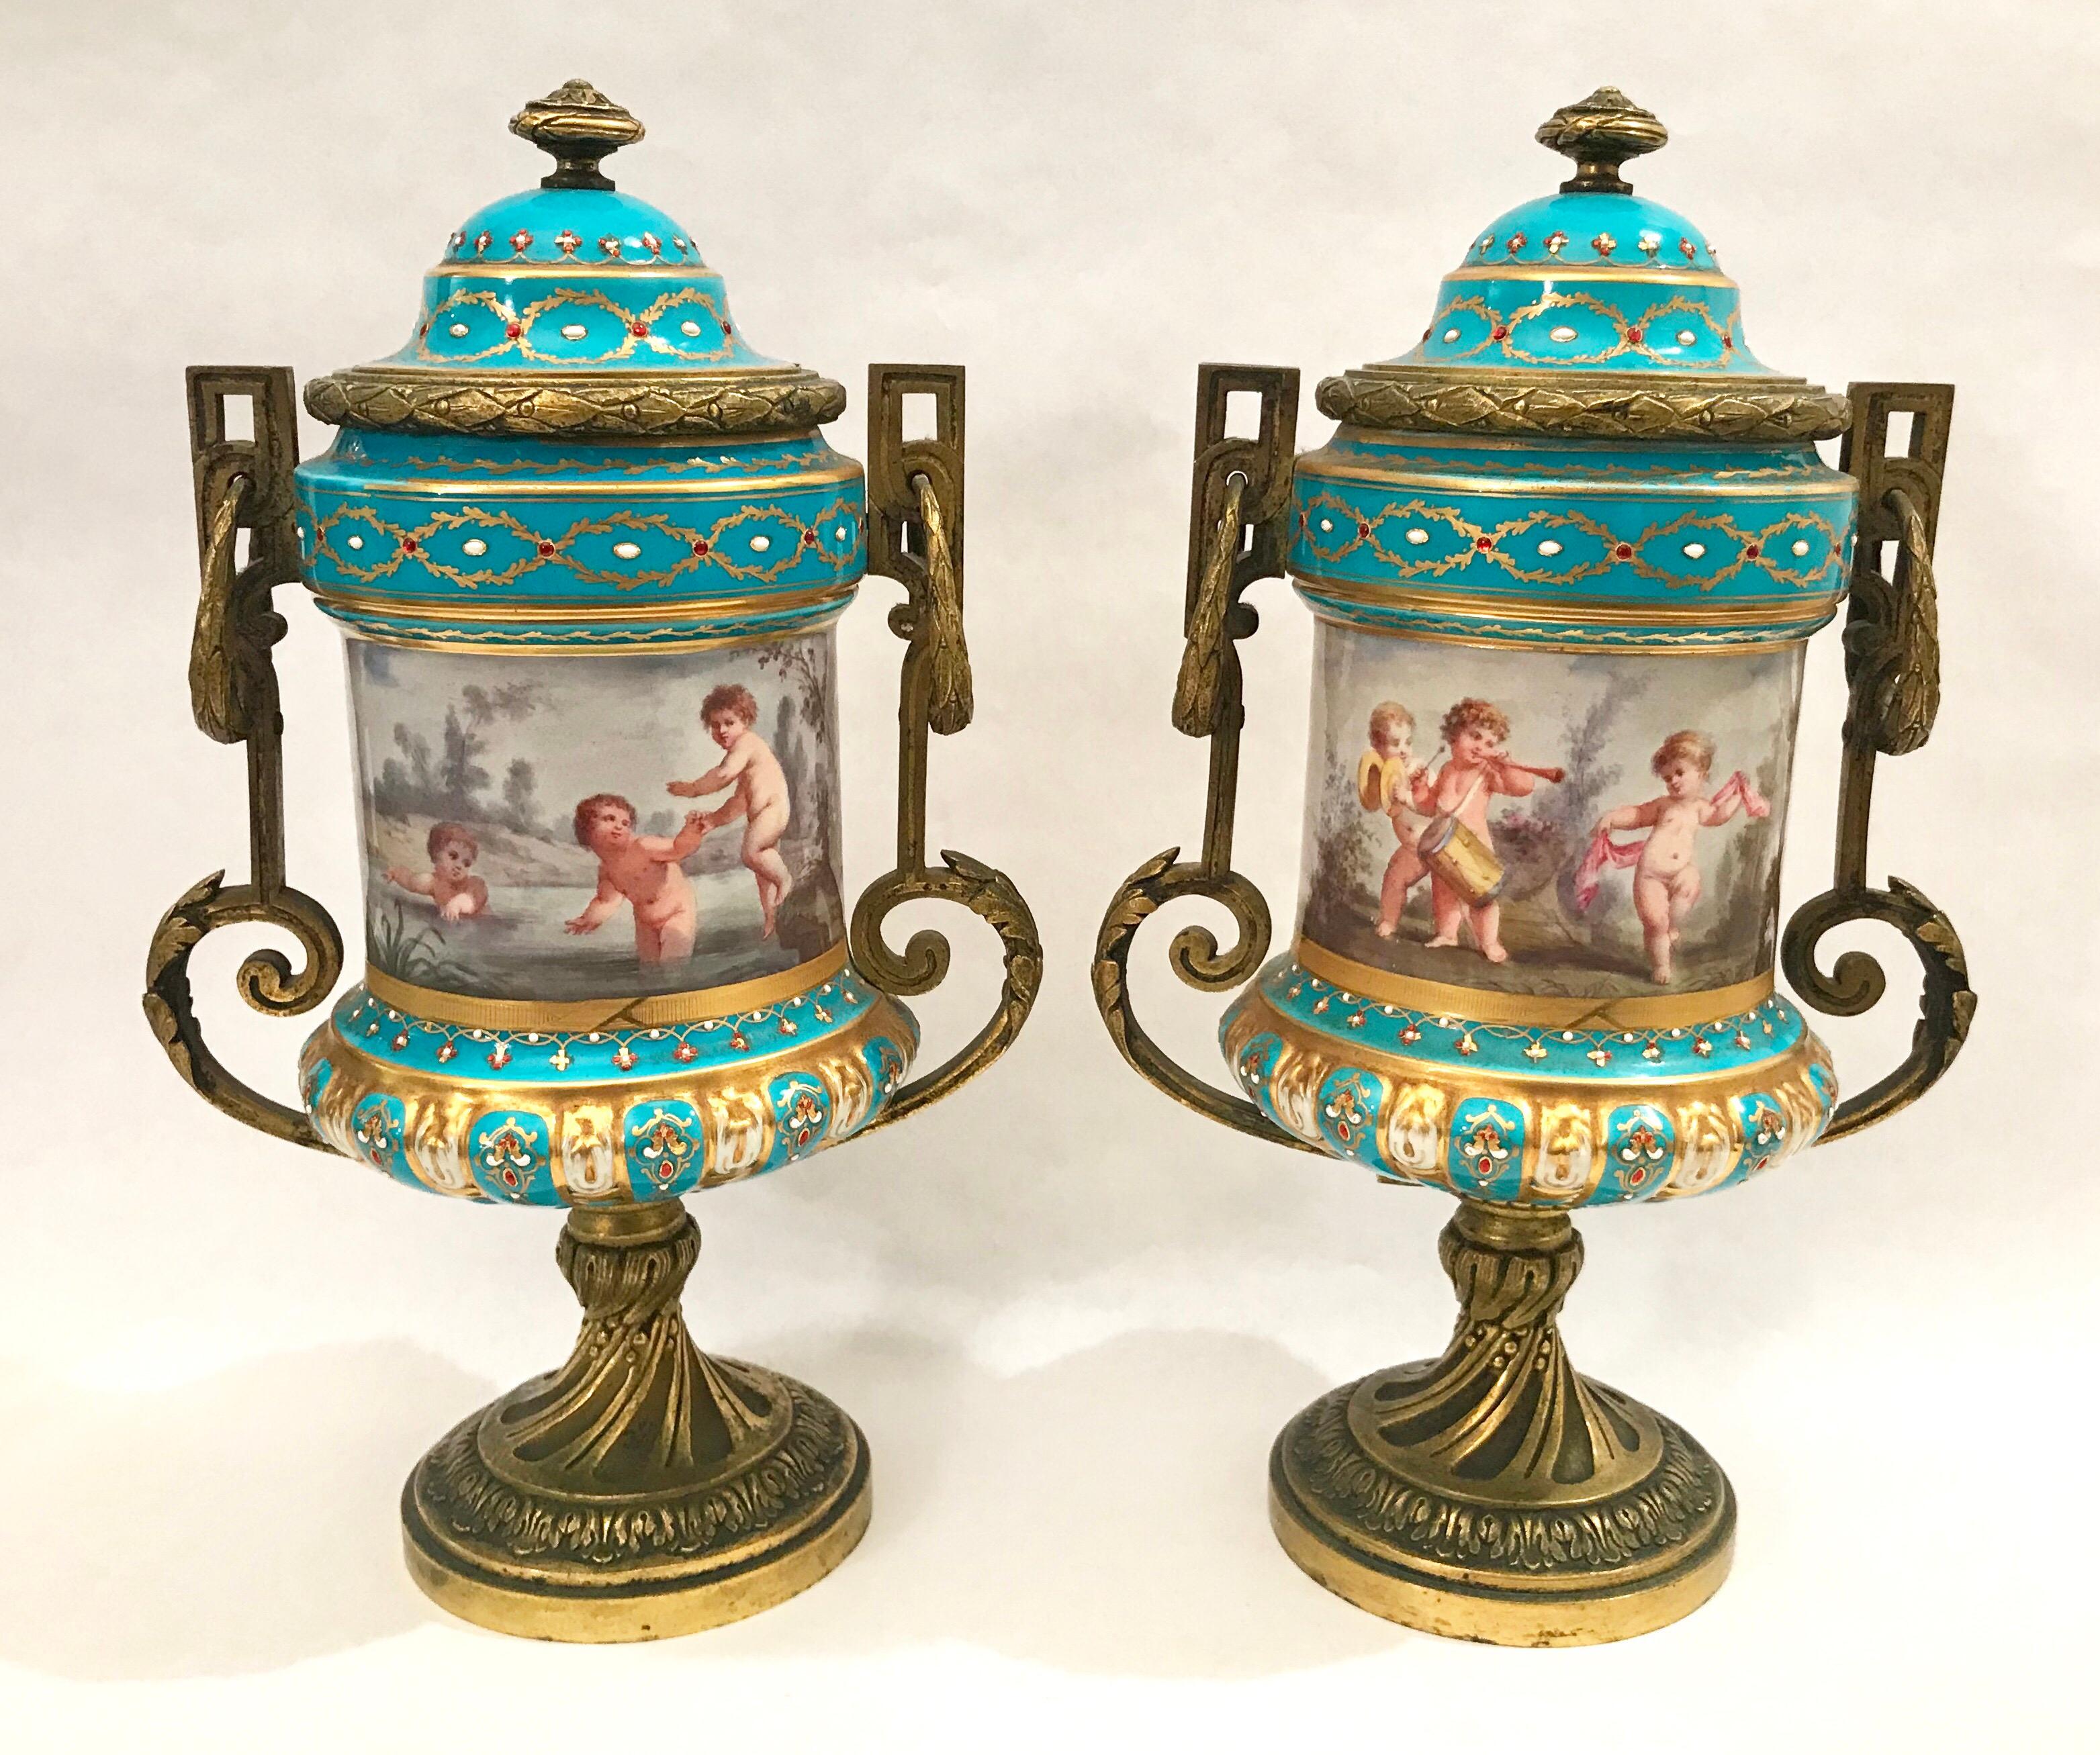 Pair of French hand painted gilt bronze mounted porcelain urns, France, 19th century.